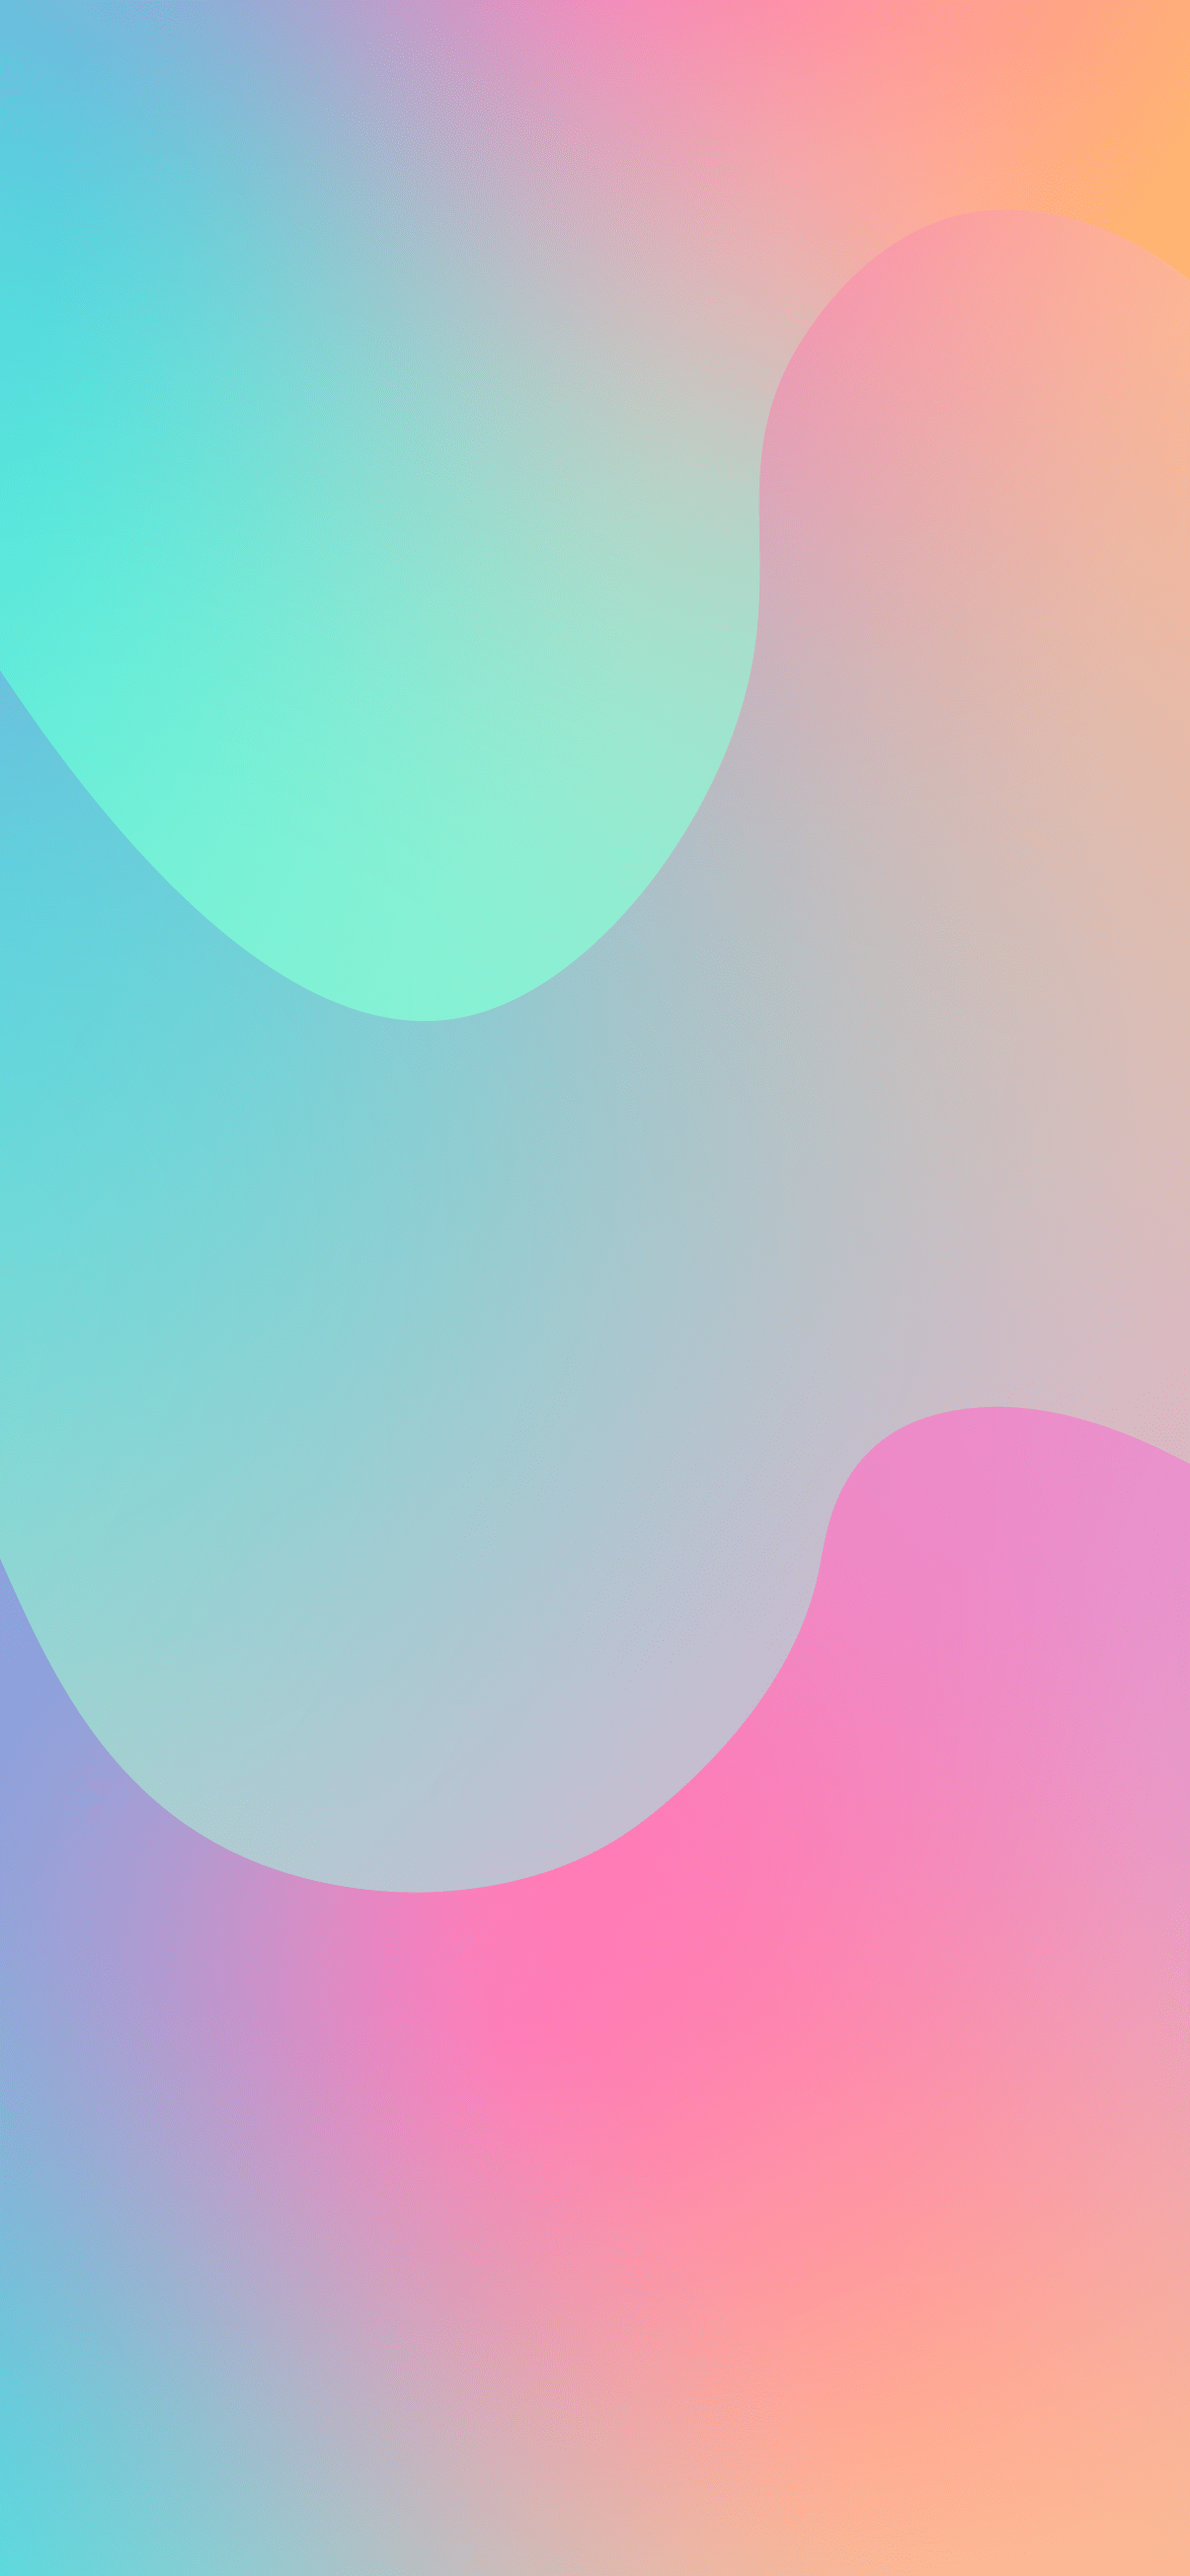 A colorful abstract background with wavy lines - Colorful